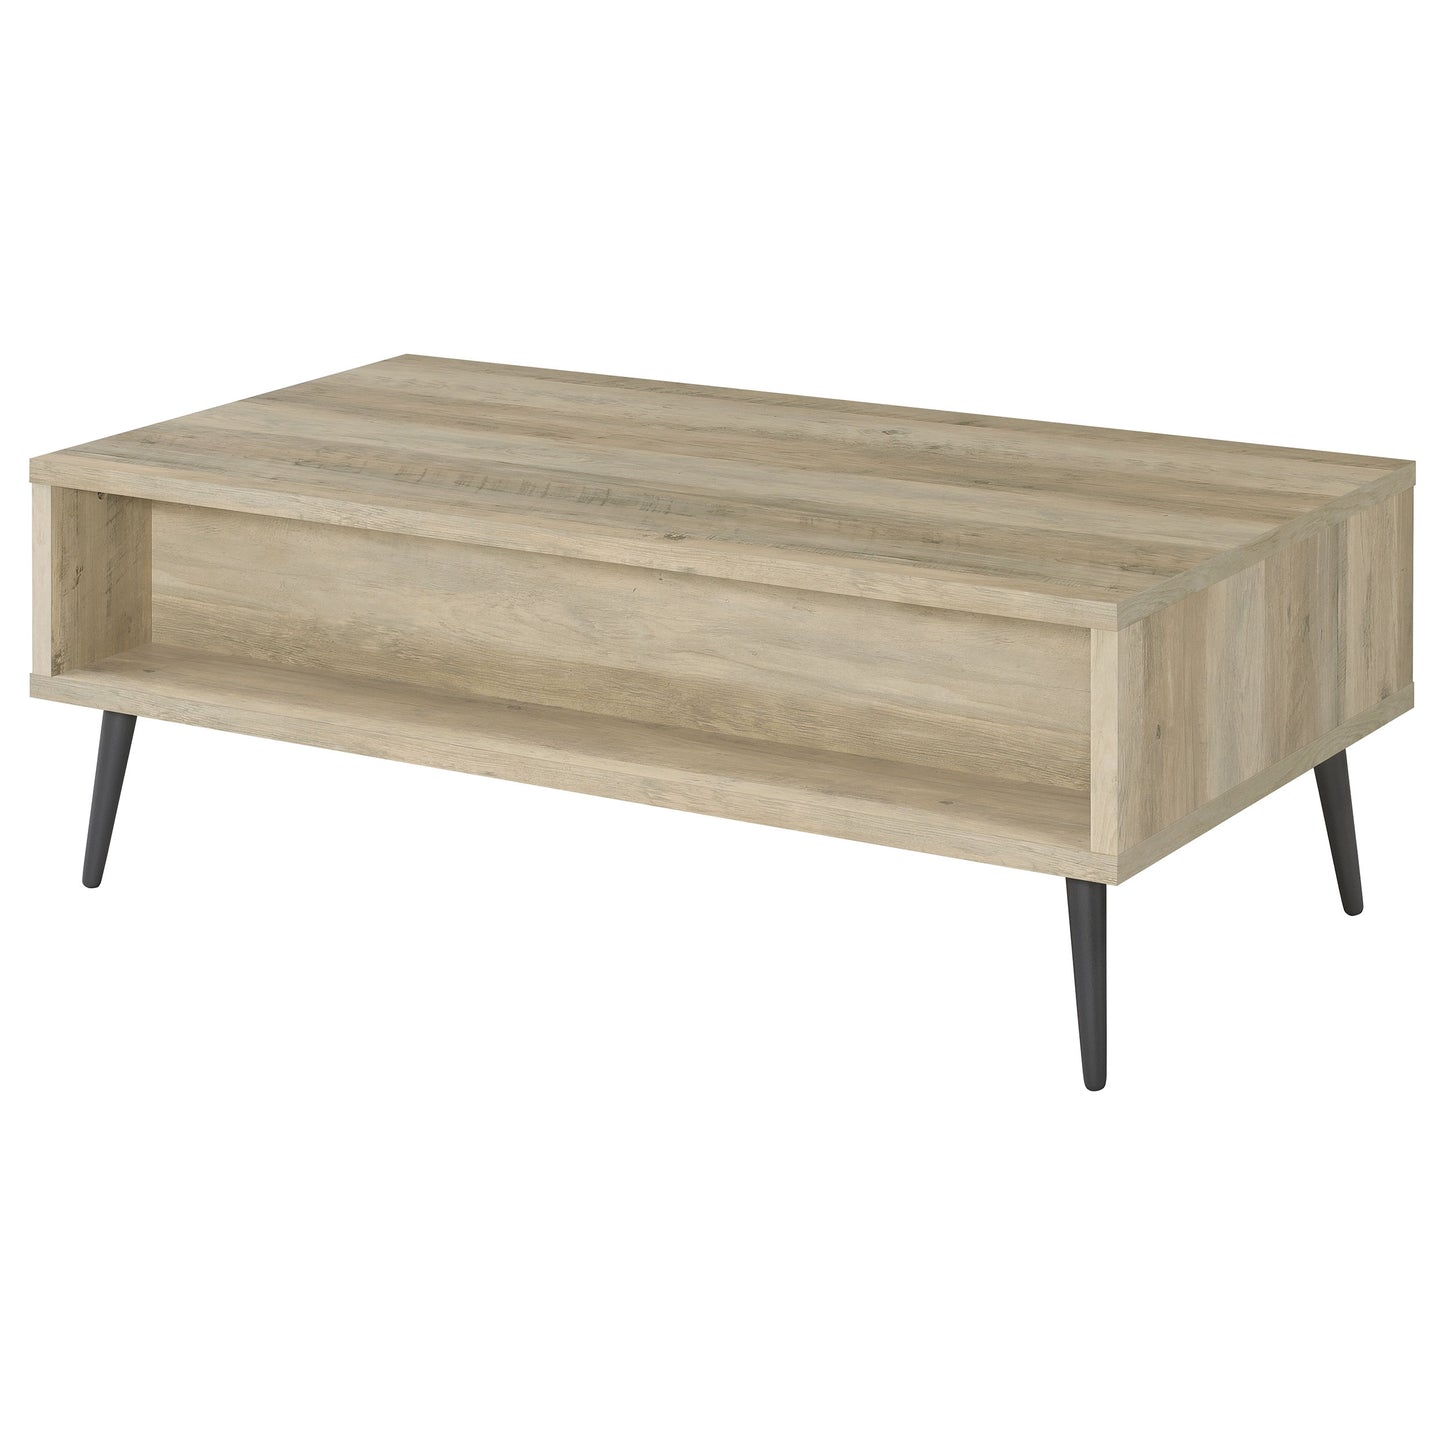 Welsh 1-drawer Rectangular Engineered Wood Coffee Table With Storage Shelf Antique Pine and Grey